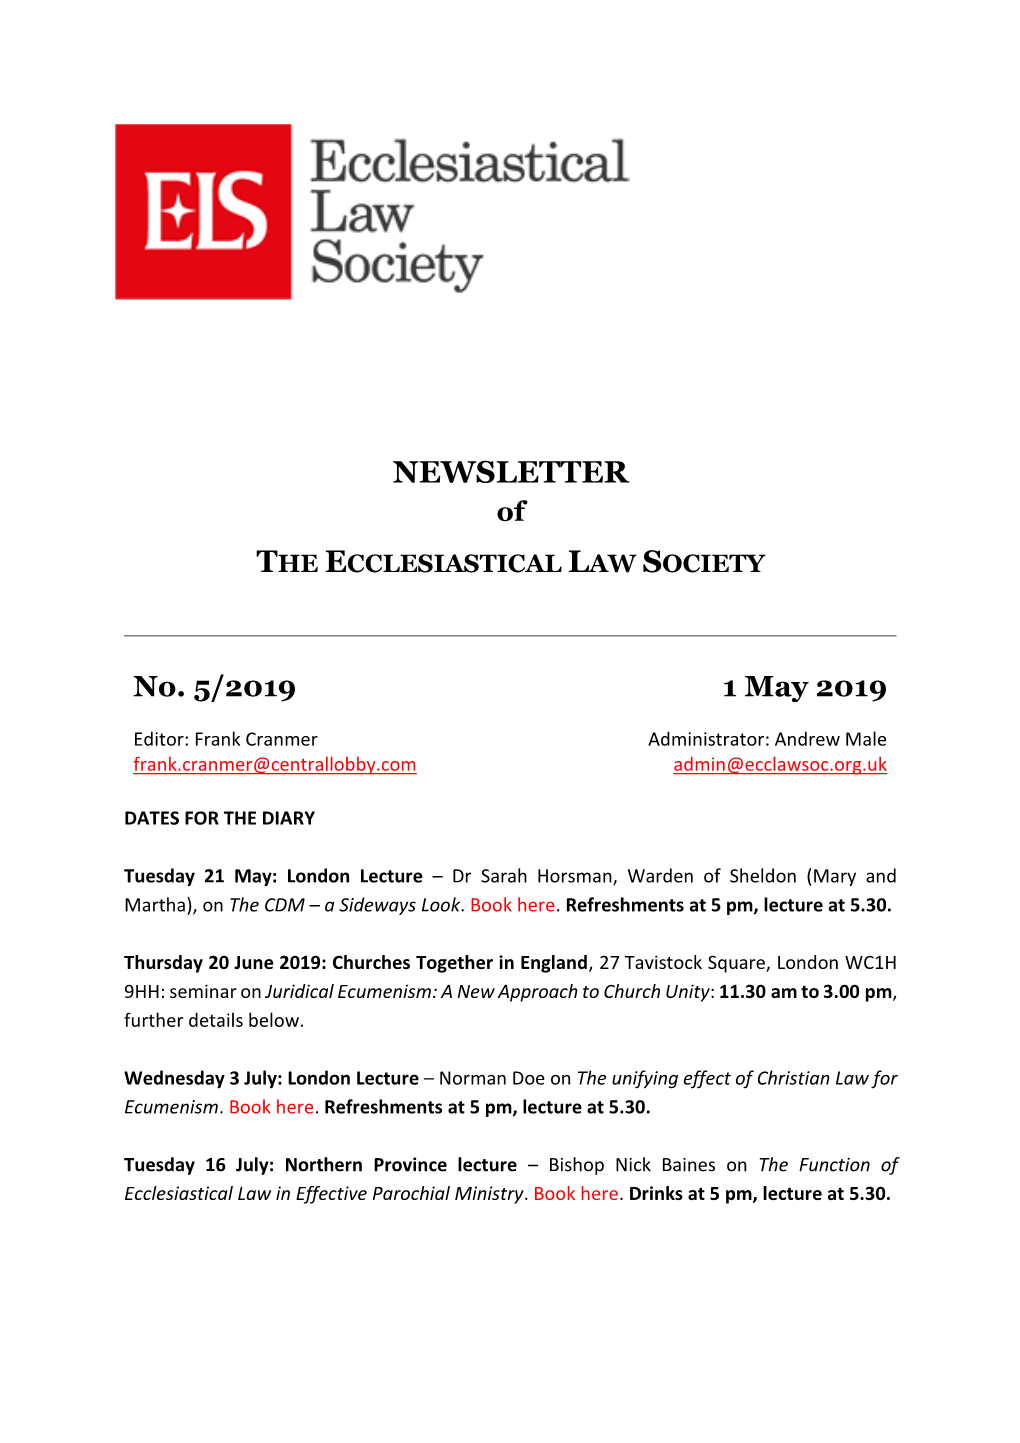 ELS Newsletter May 2019